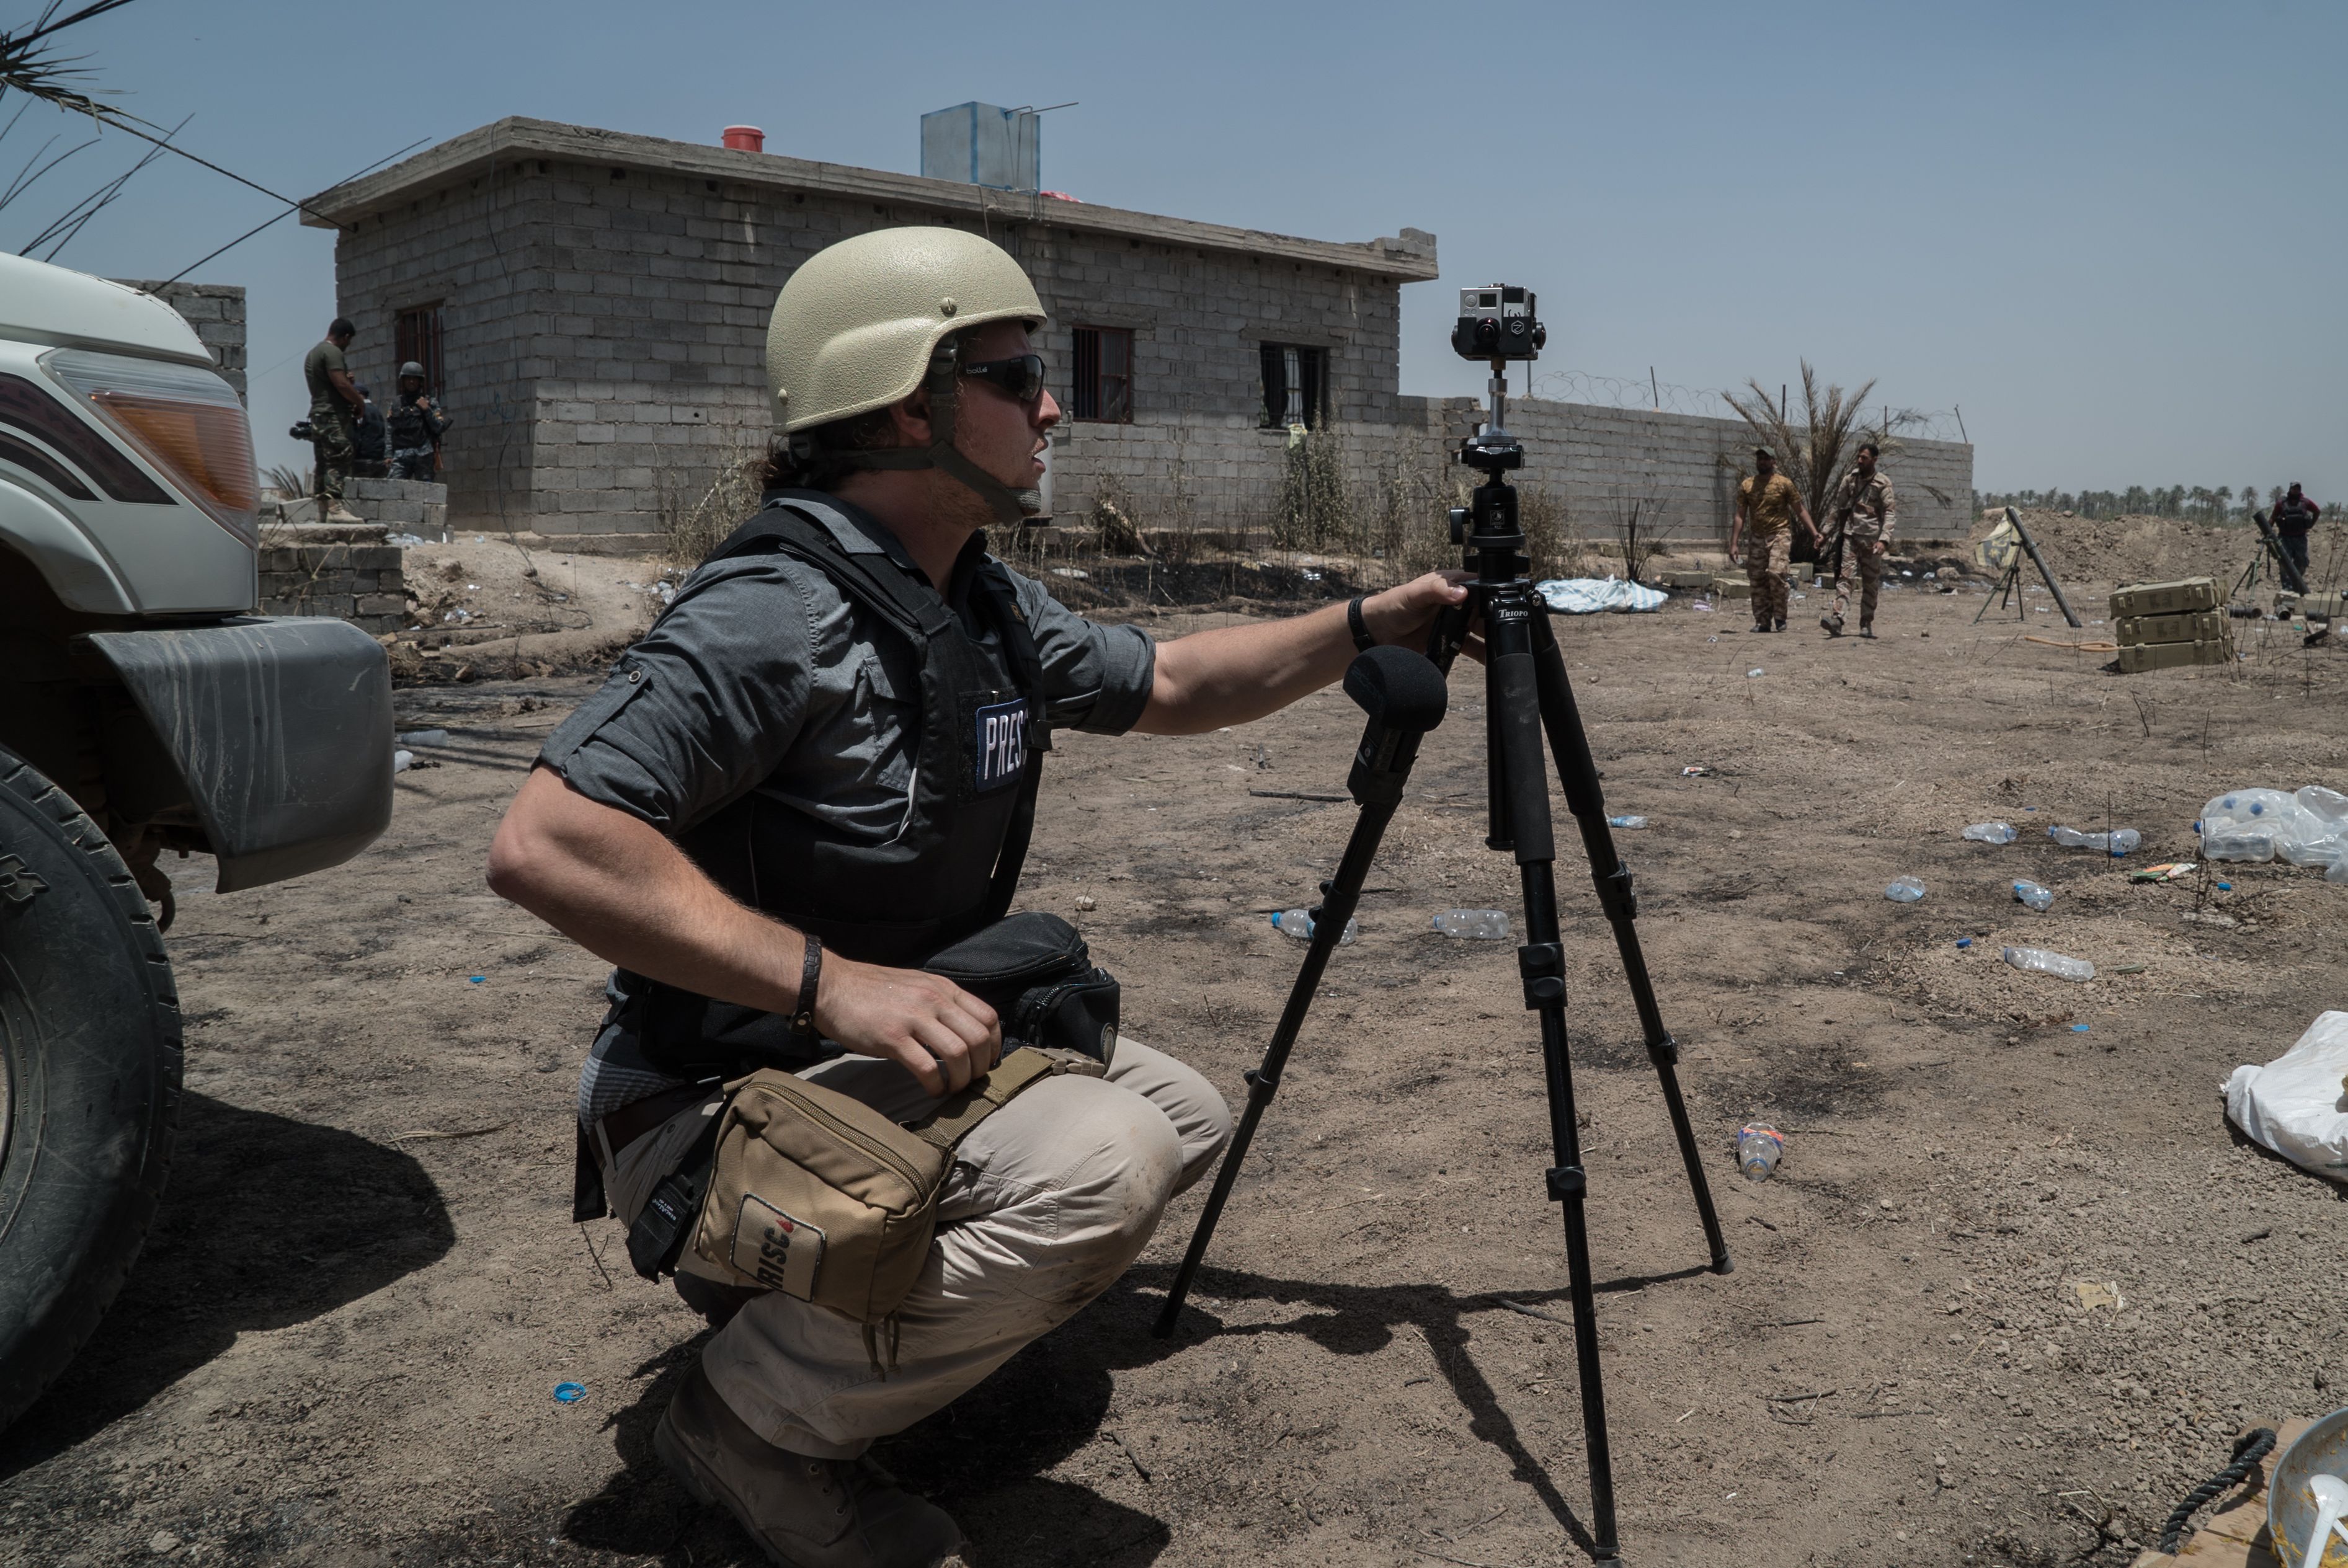 Ben C. Solomon filming in Iraq. Image courtesy of New York Times.